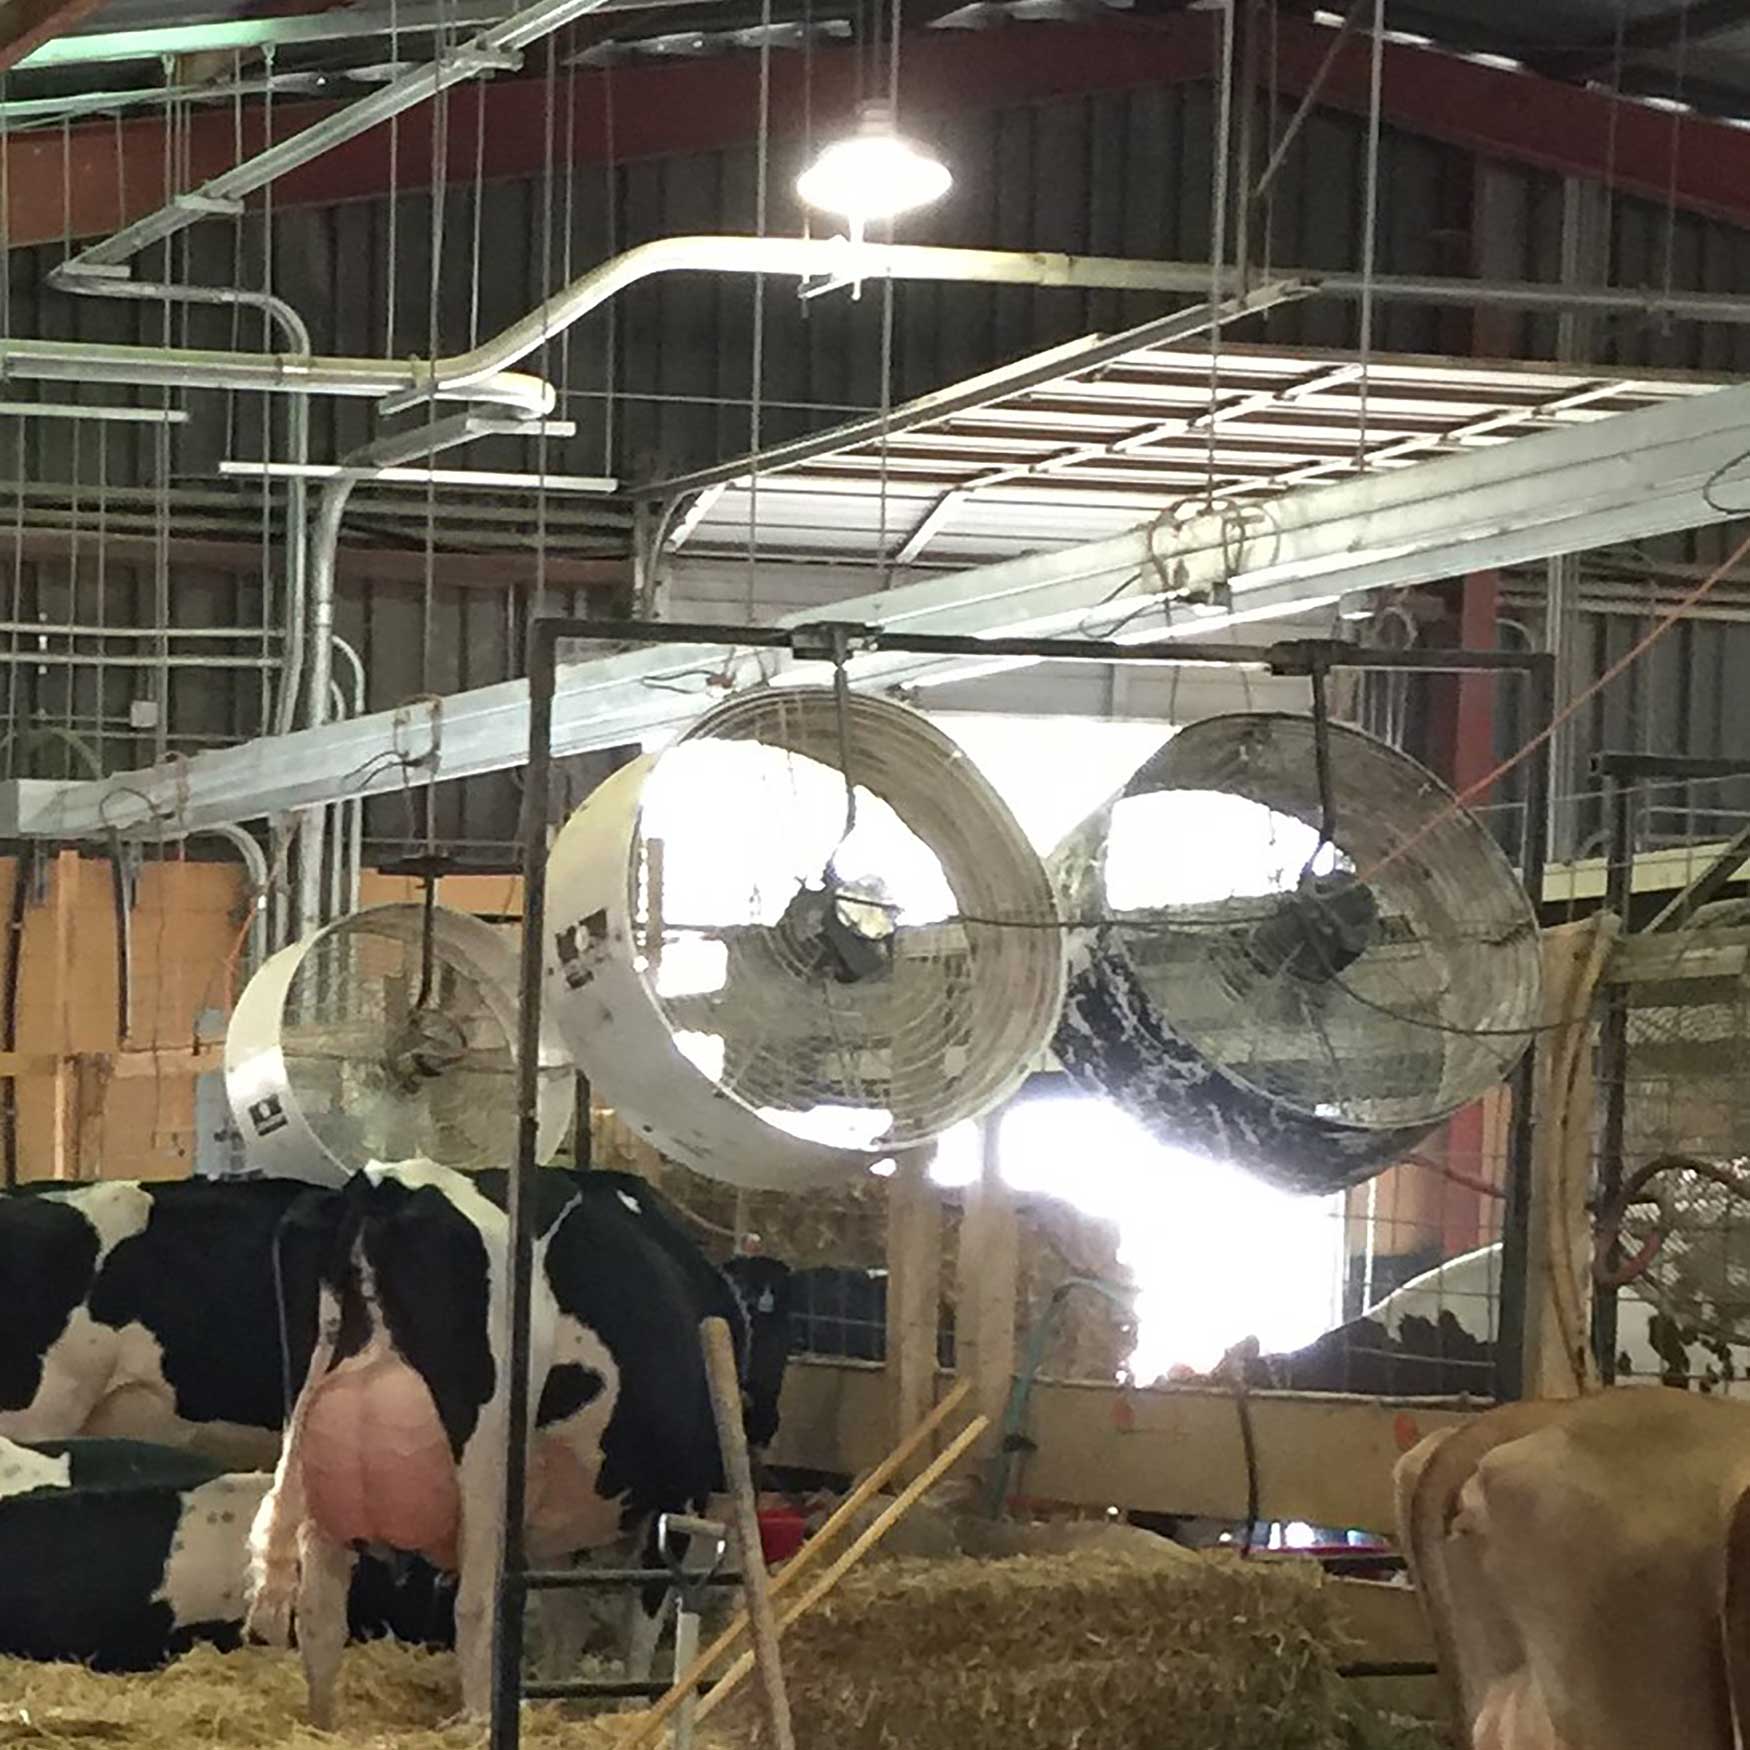 Large fans helping to keep Dairy Cattle cool in a livestock housing facility.